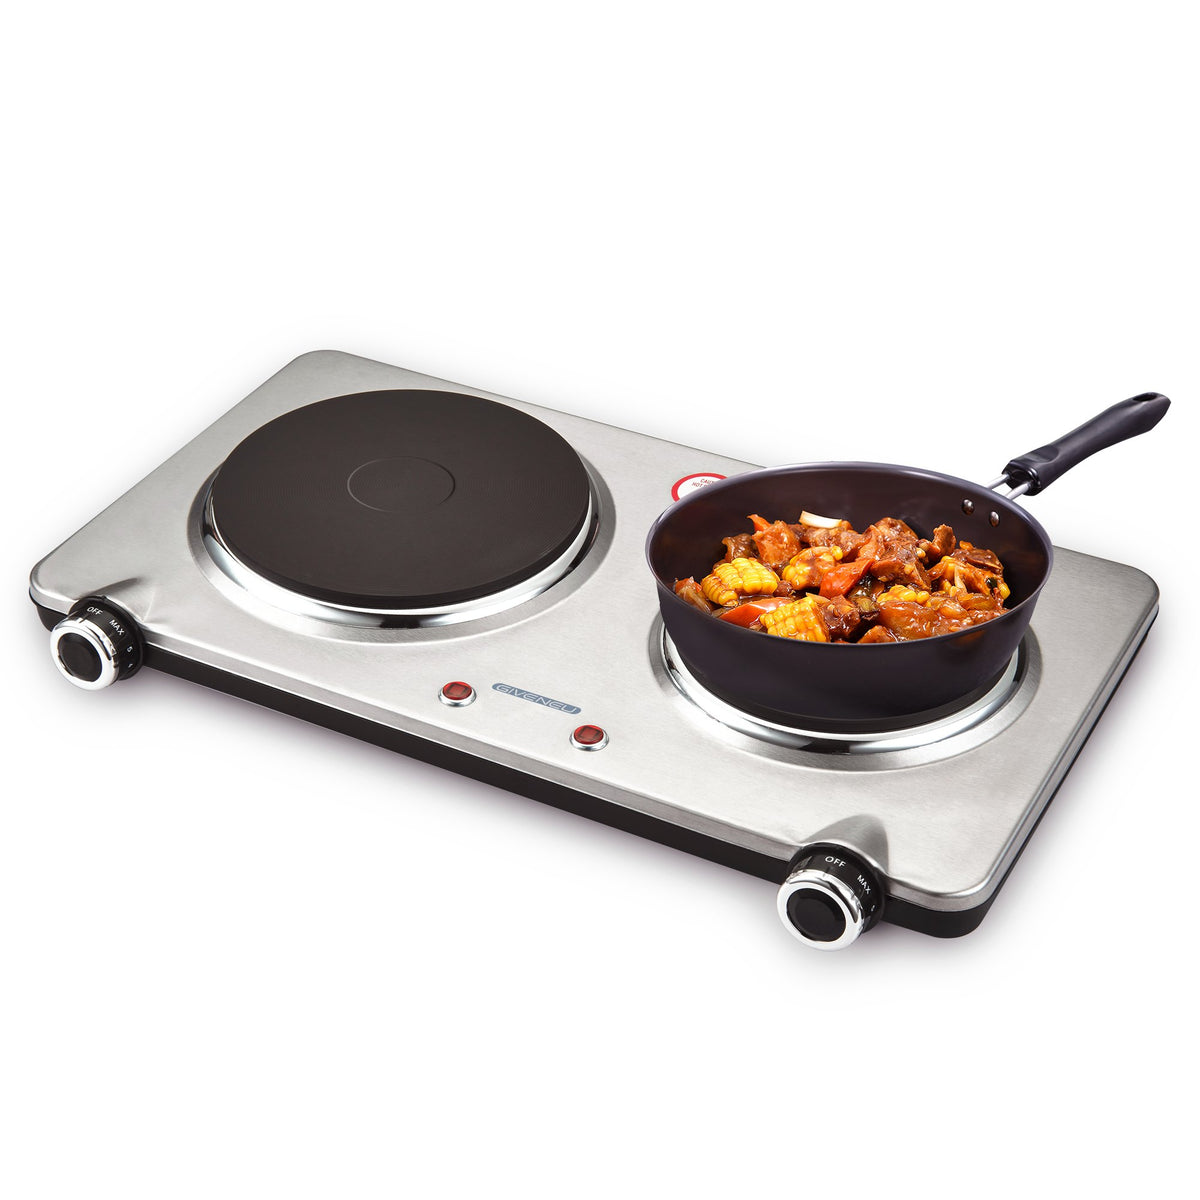 Giveneu 2020 Best movable fast heat-up Electric Stove double Hot Plate